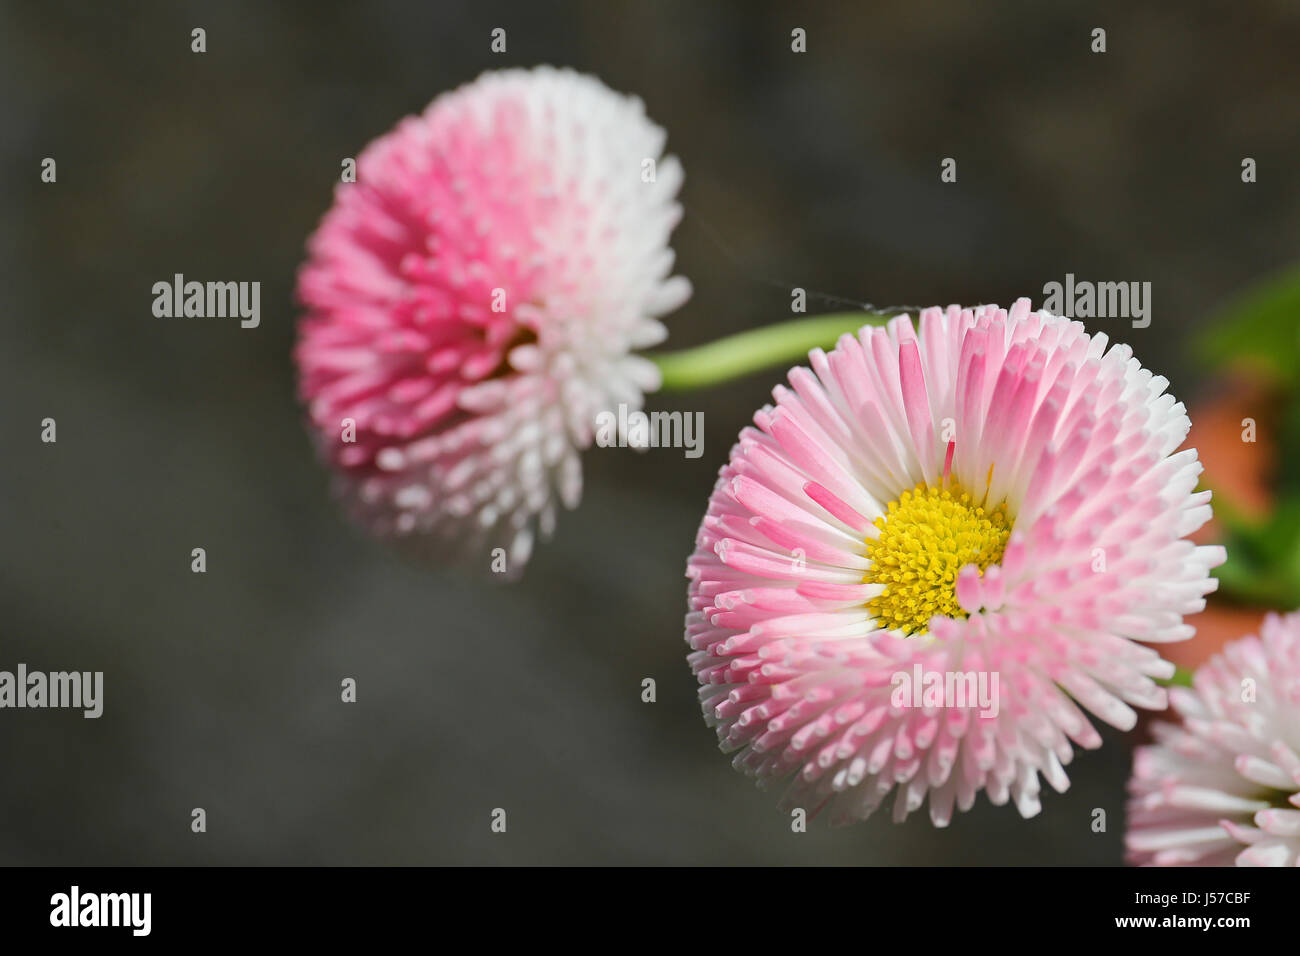 Pink daisy like flower, Bellis Perennis, against a gray blurred background Stock Photo